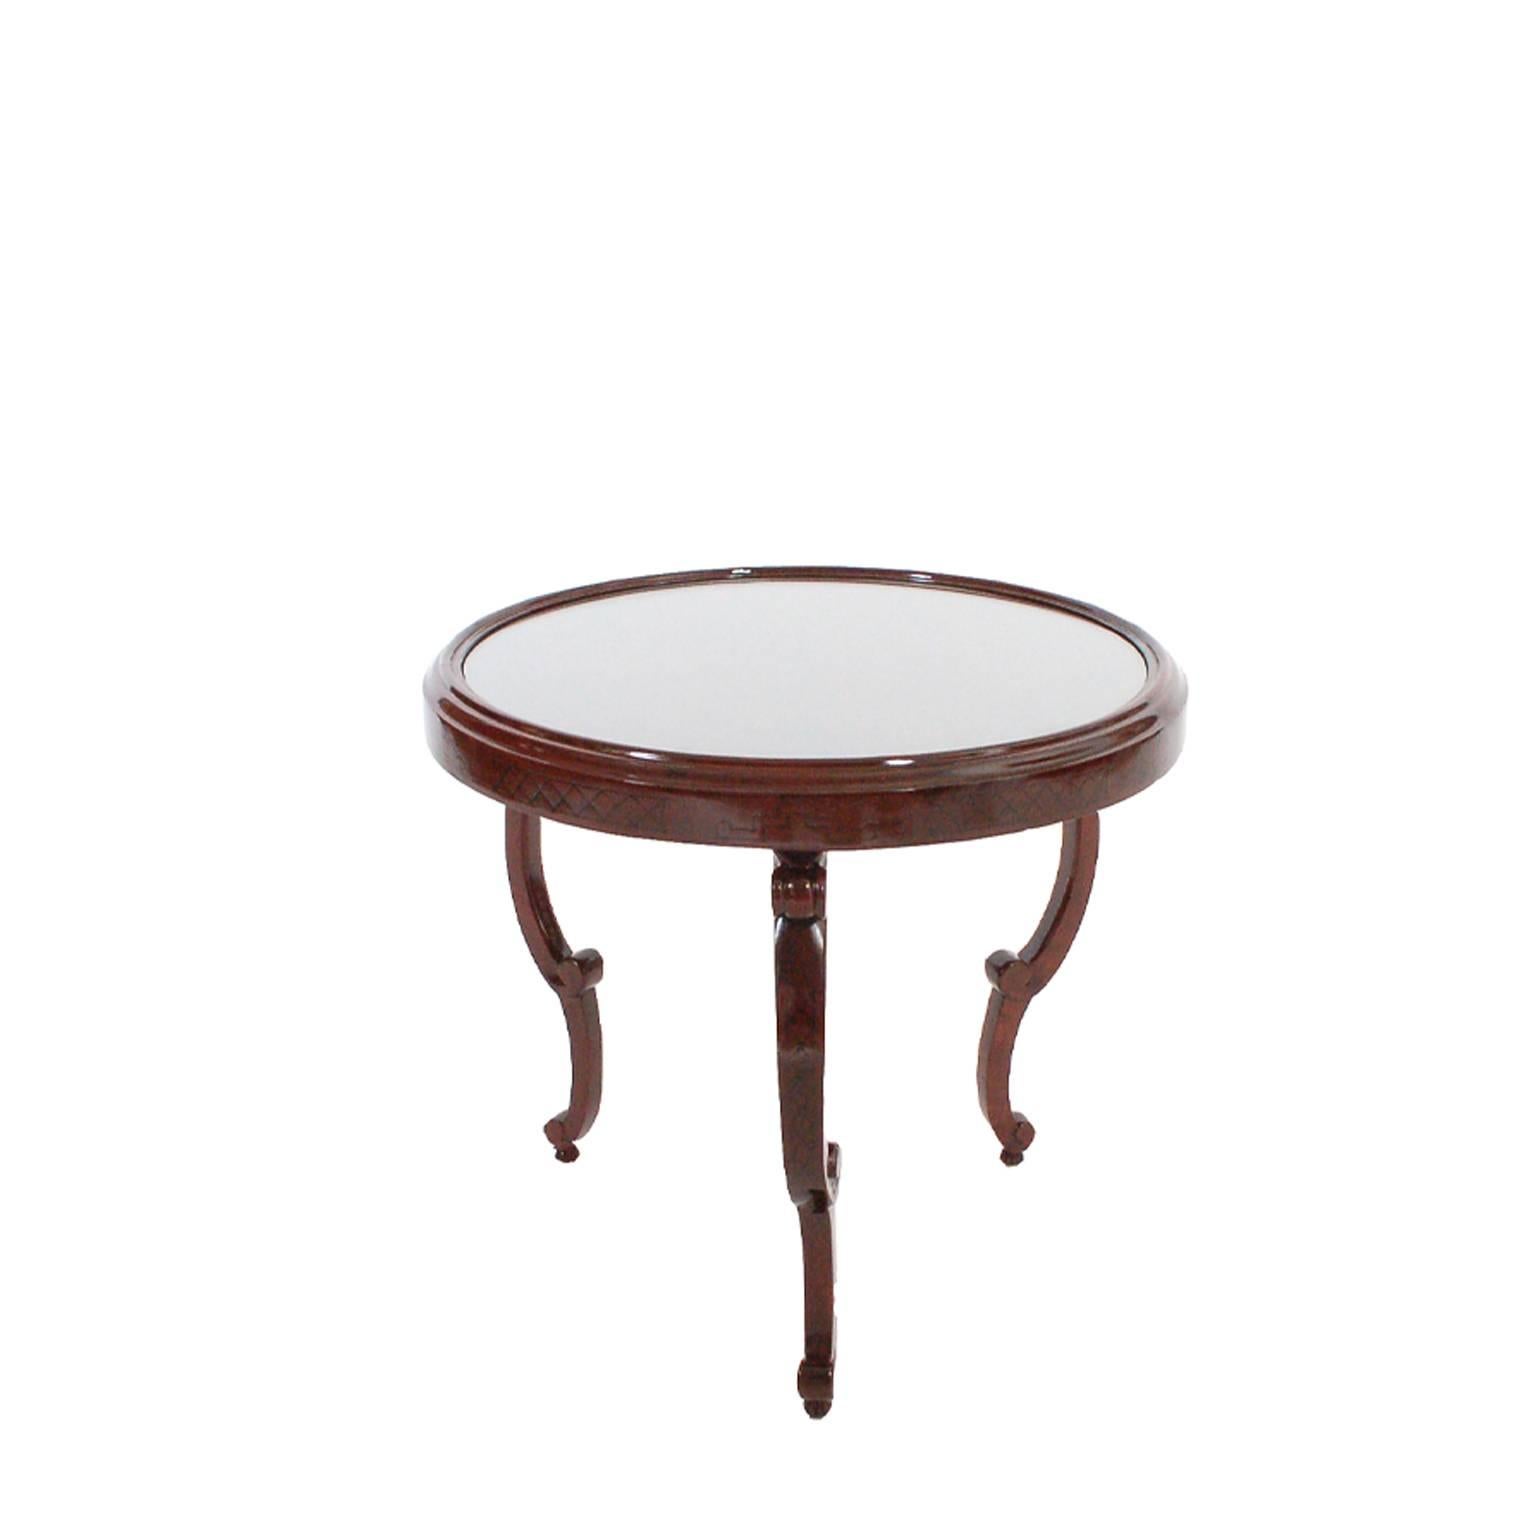 Mahogany-stained birch with ebony inlaid designs. Three scrolled legs and glass insert in top. Restored.